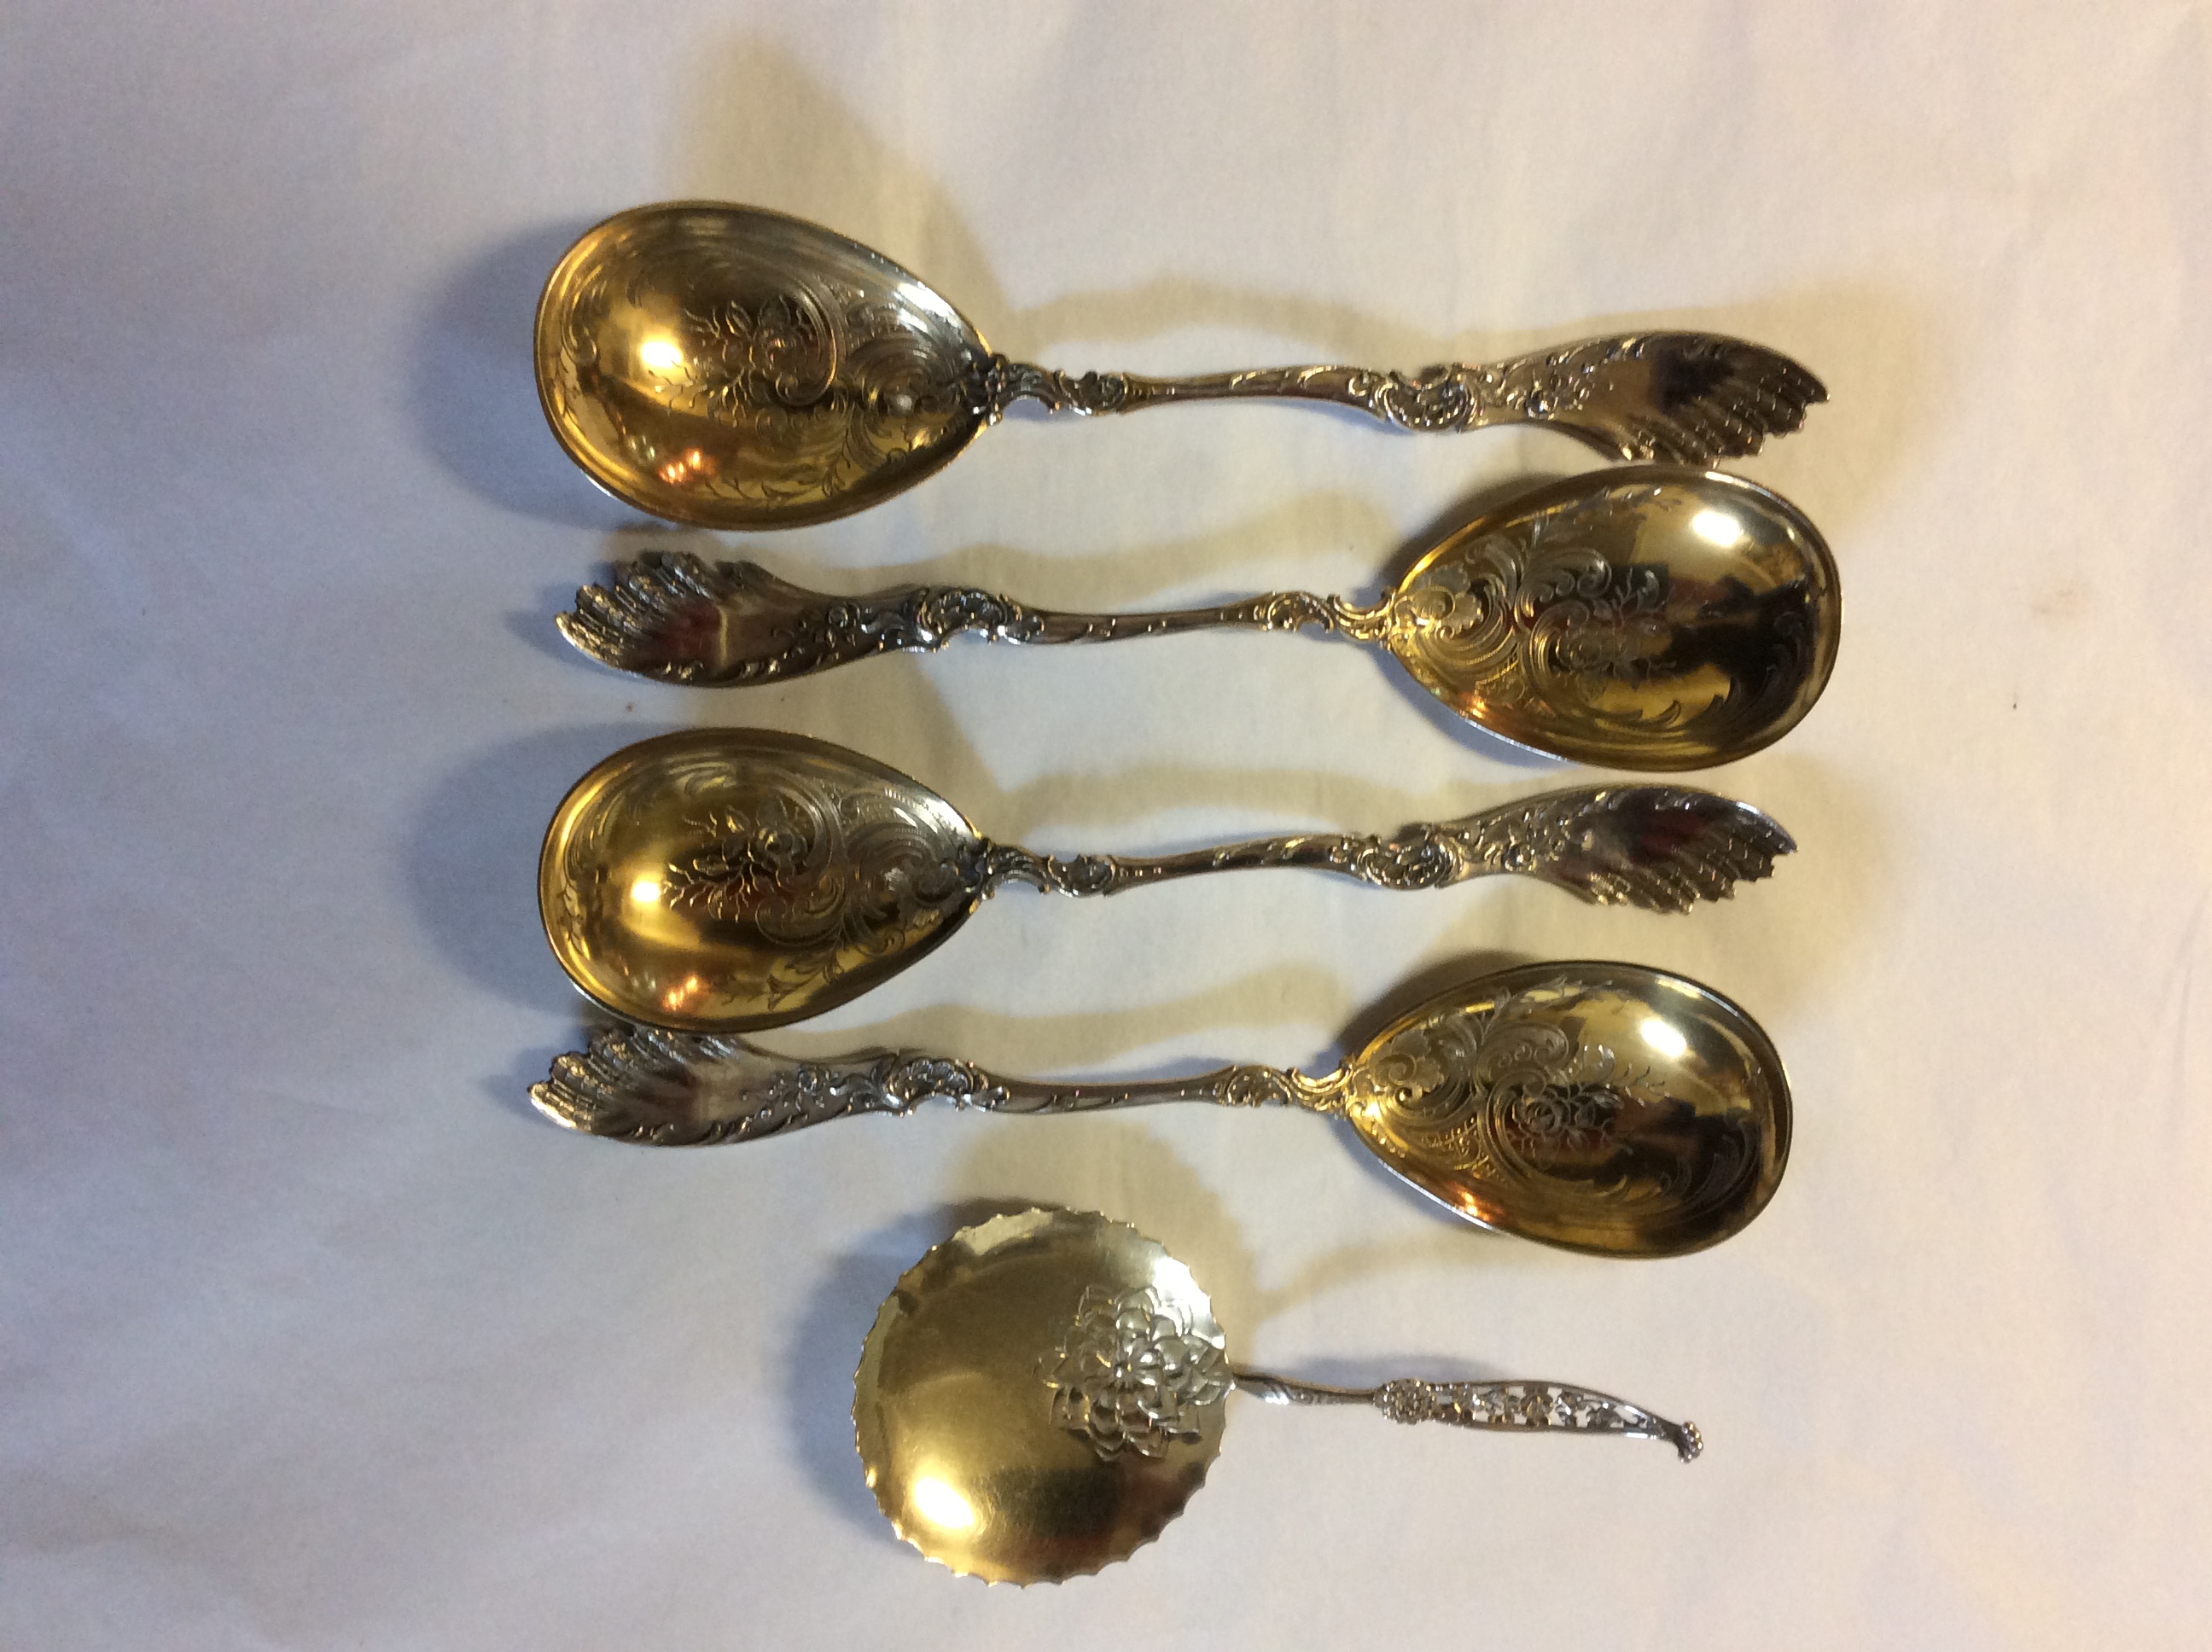 VON MÜNCHHAUSEN, AN EARLY 20TH CENTURY GERMAN SILVER GILT SET OF SERVING SPOONS Each finely engraved